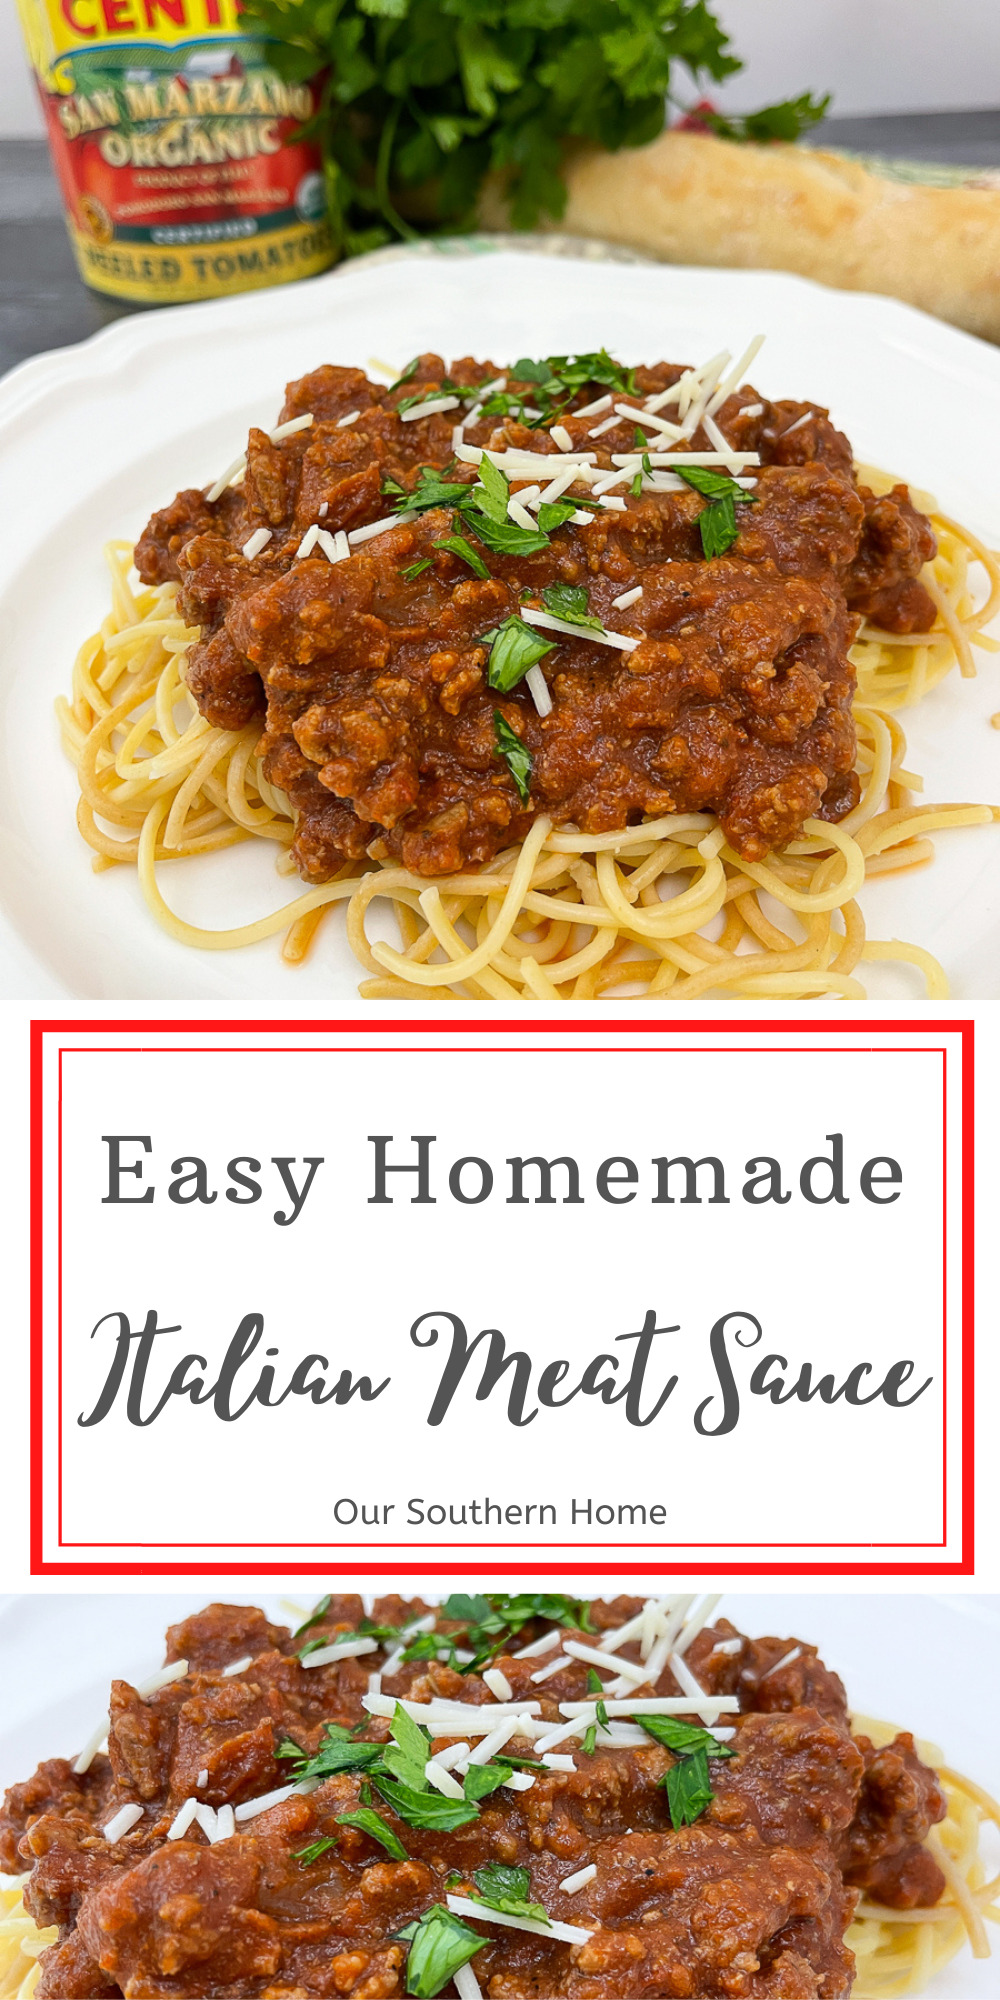 meat sauce graphic with text overlay